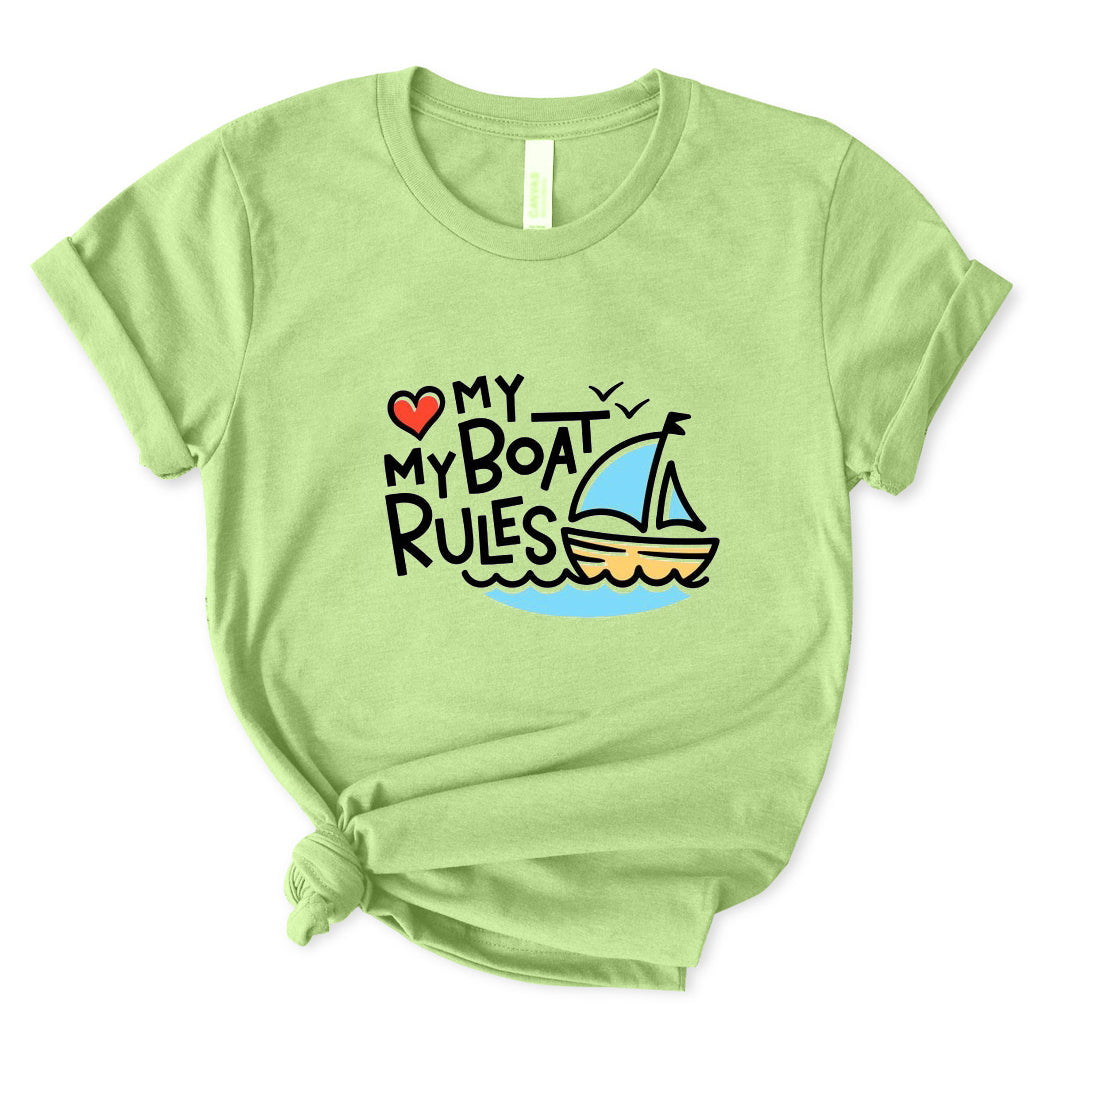 My Boat My Rules T-Shirt for Women